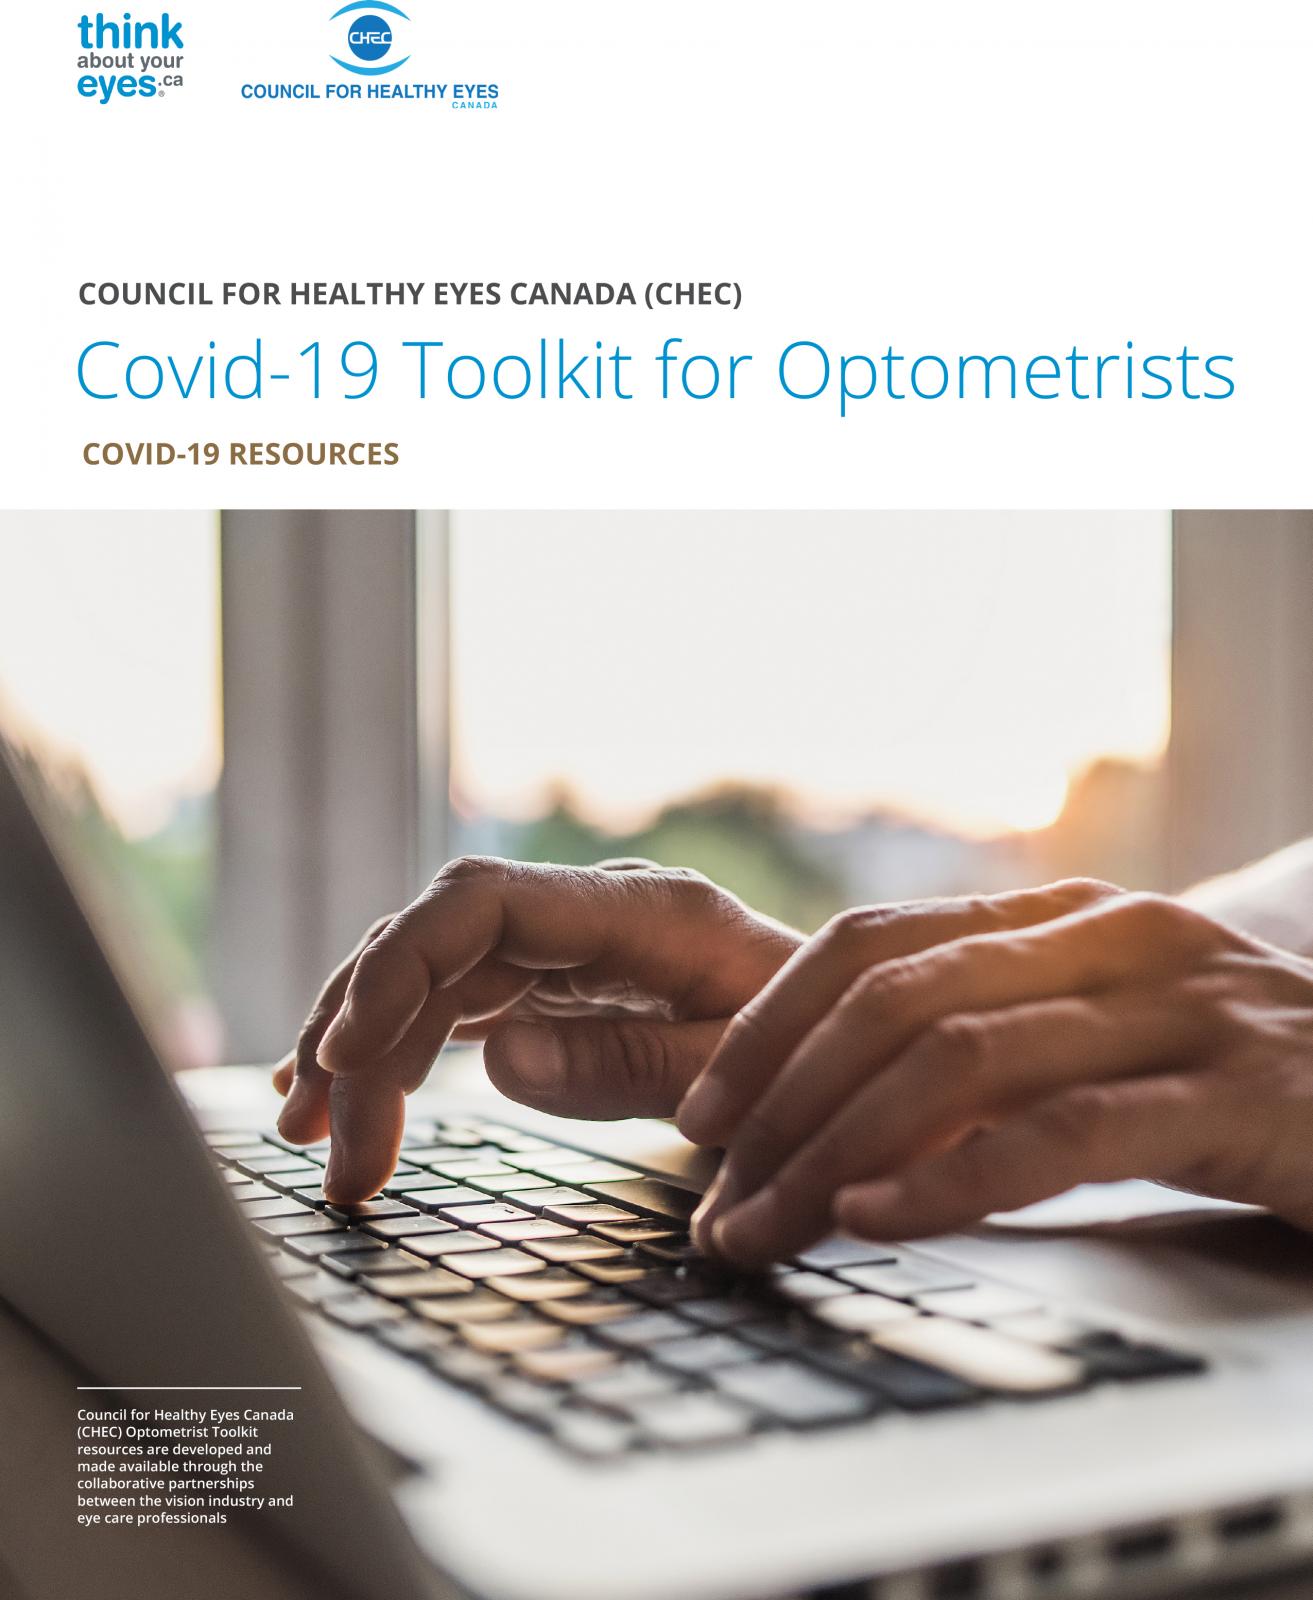 Covid-19 Toolkit for Optometrists - COVID-19 RESOURCES